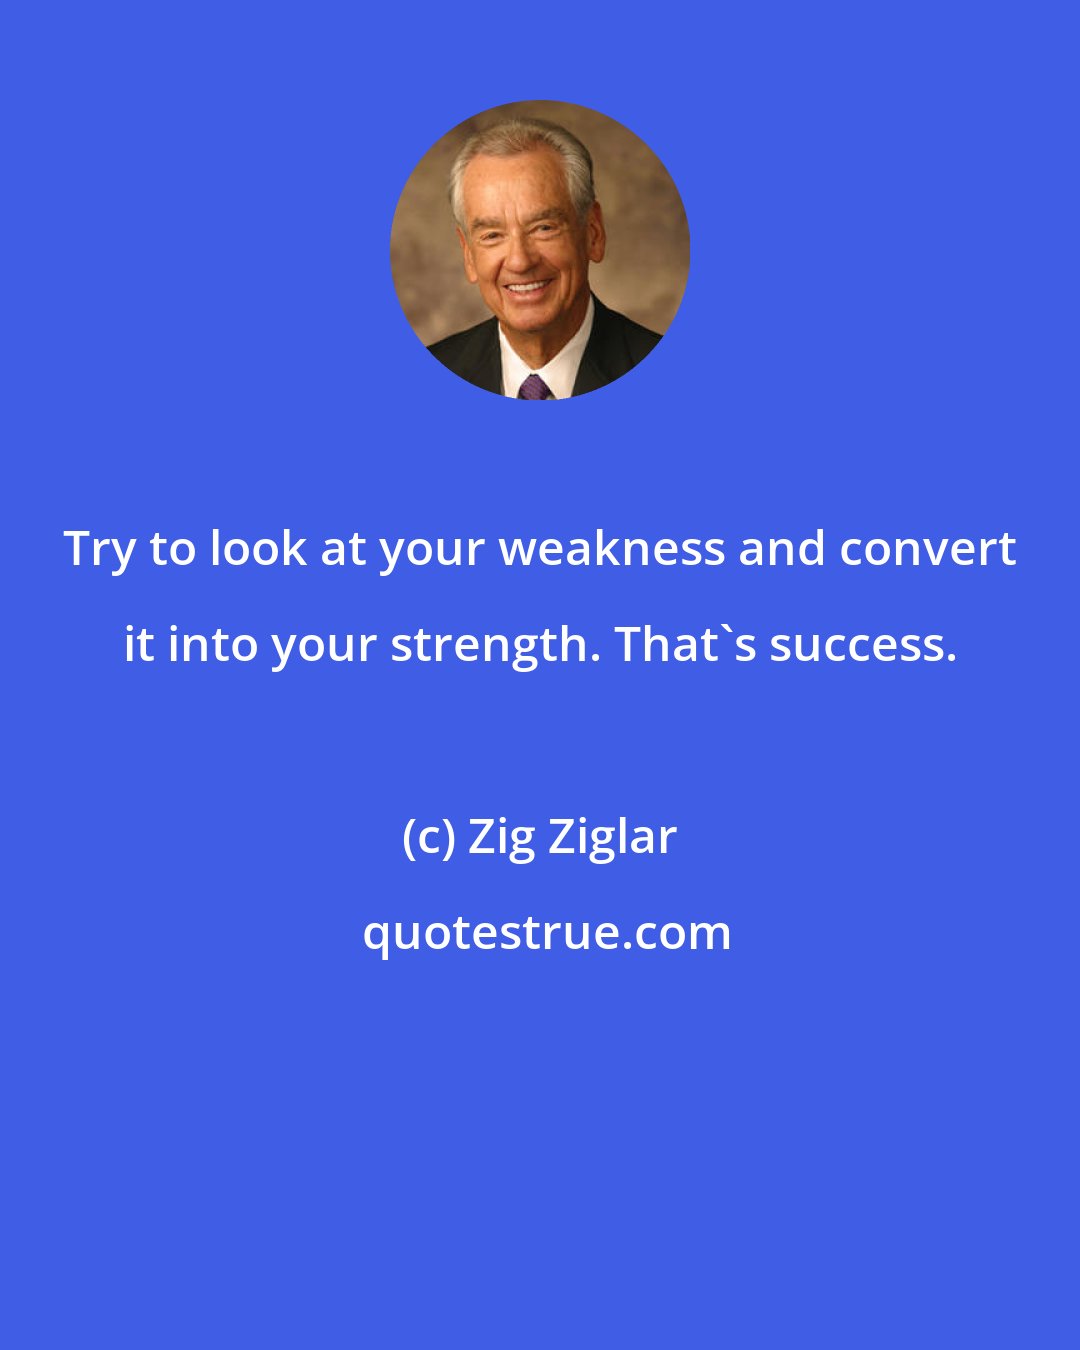 Zig Ziglar: Try to look at your weakness and convert it into your strength. That's success.